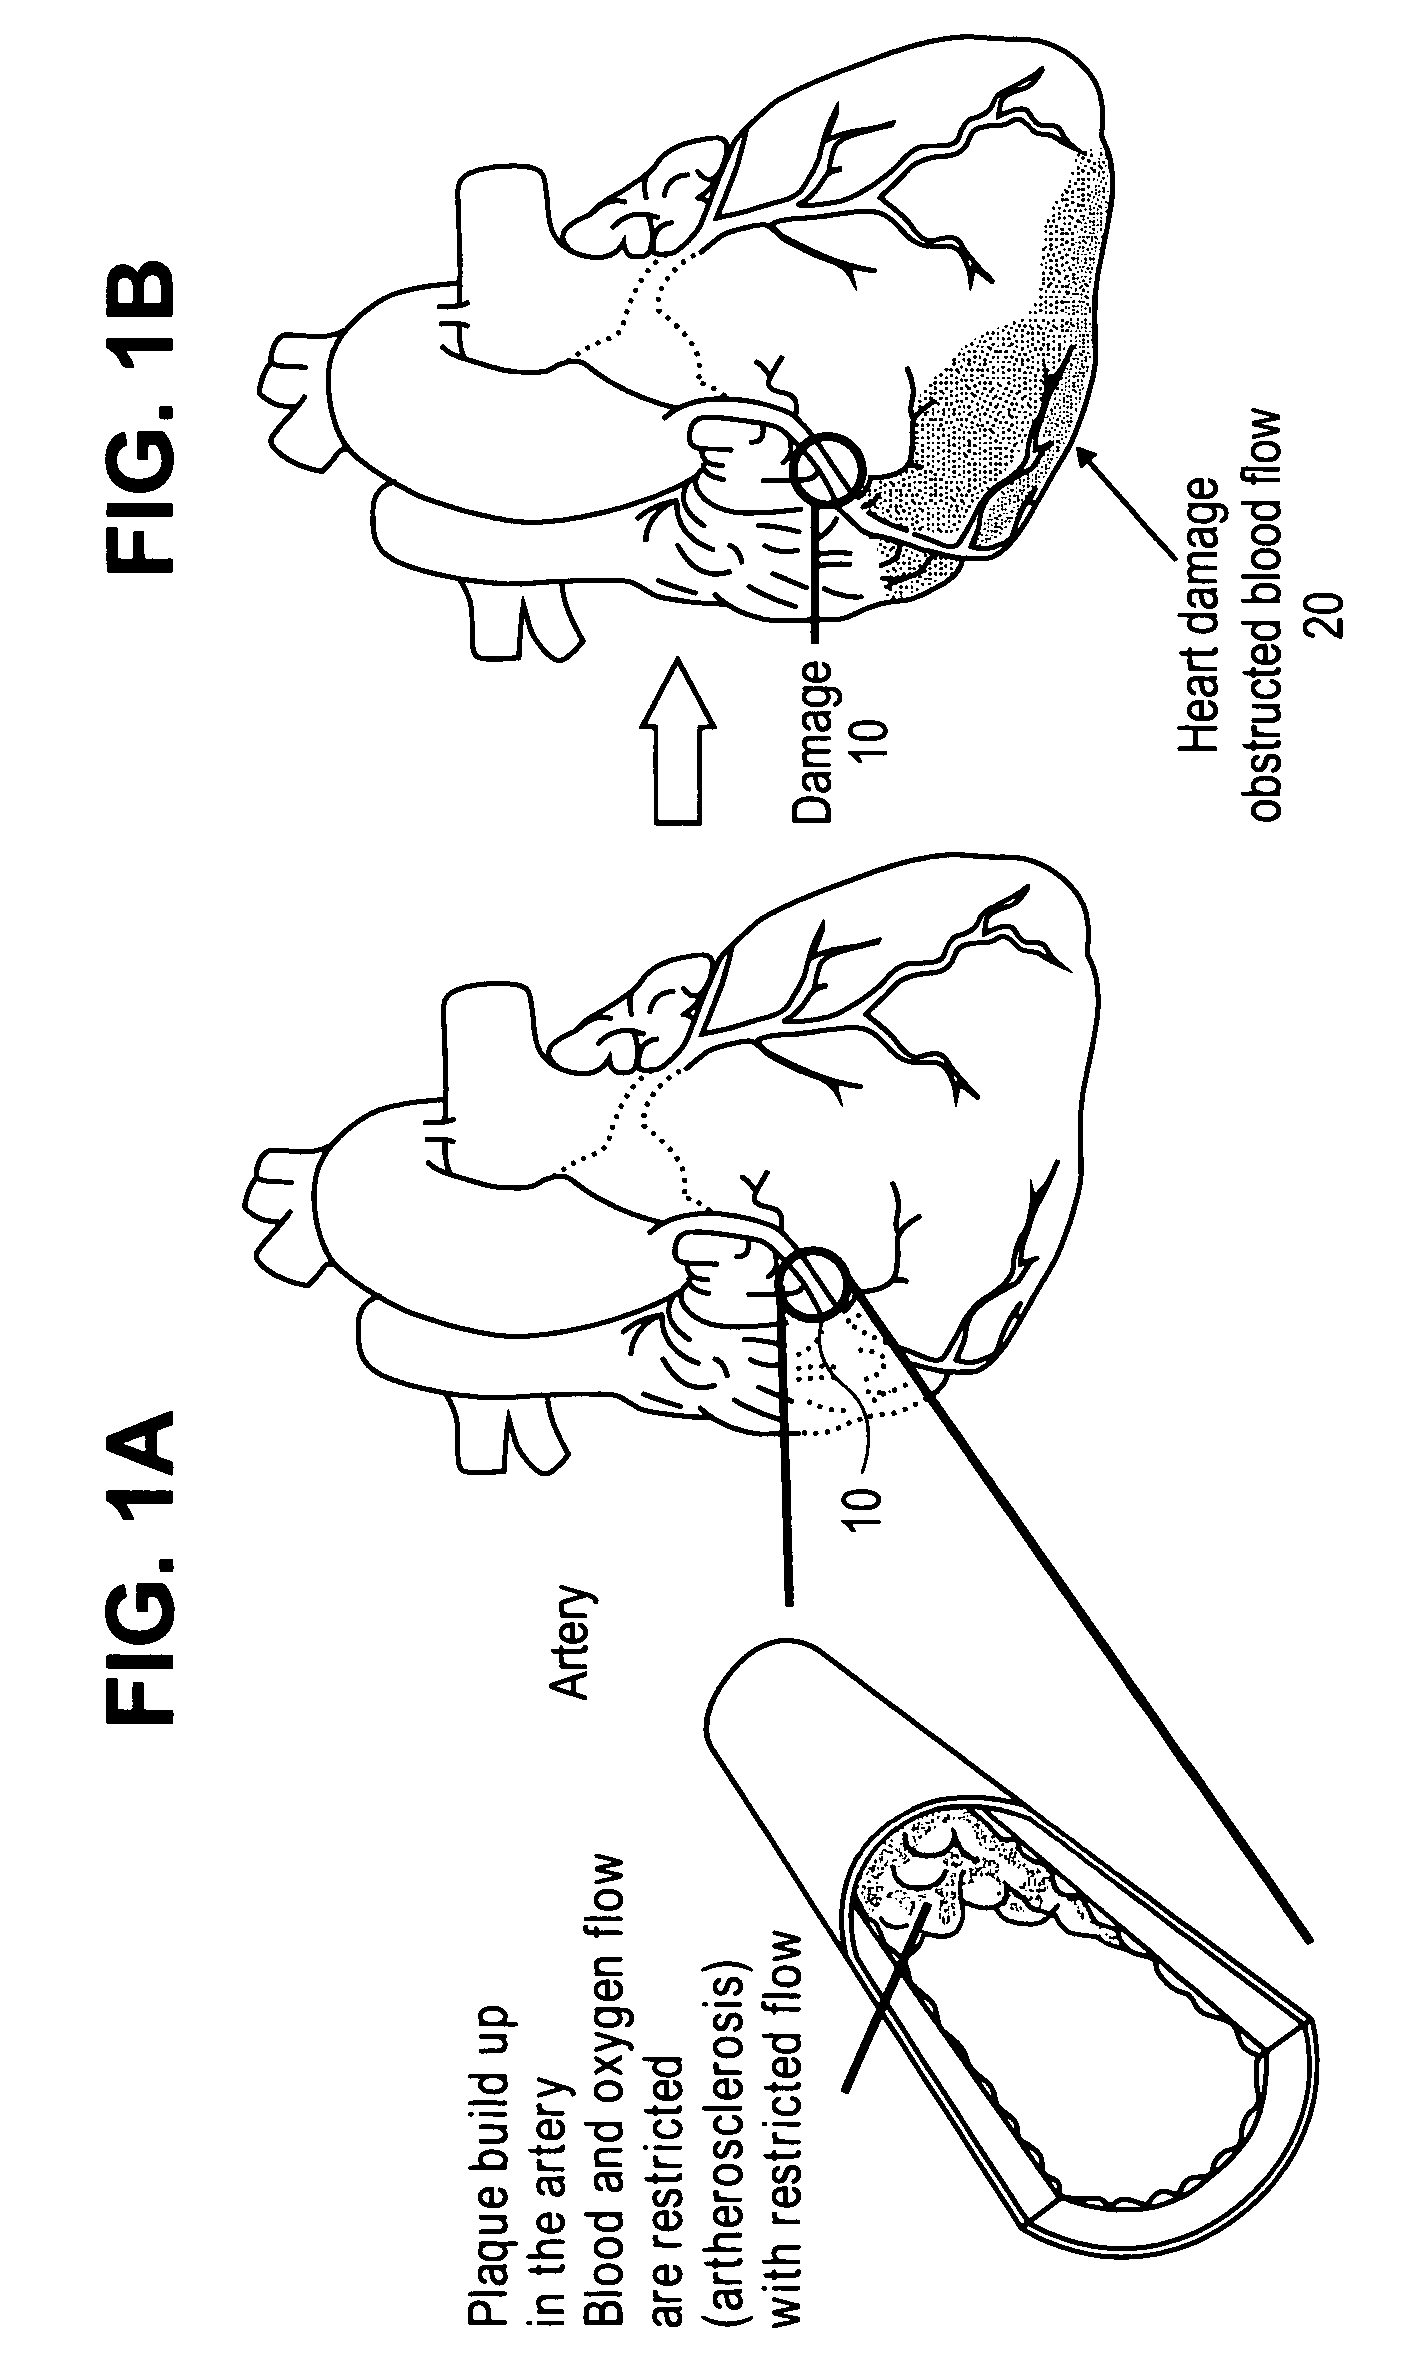 Modified two-component gelation systems, methods of use and methods of manufacture